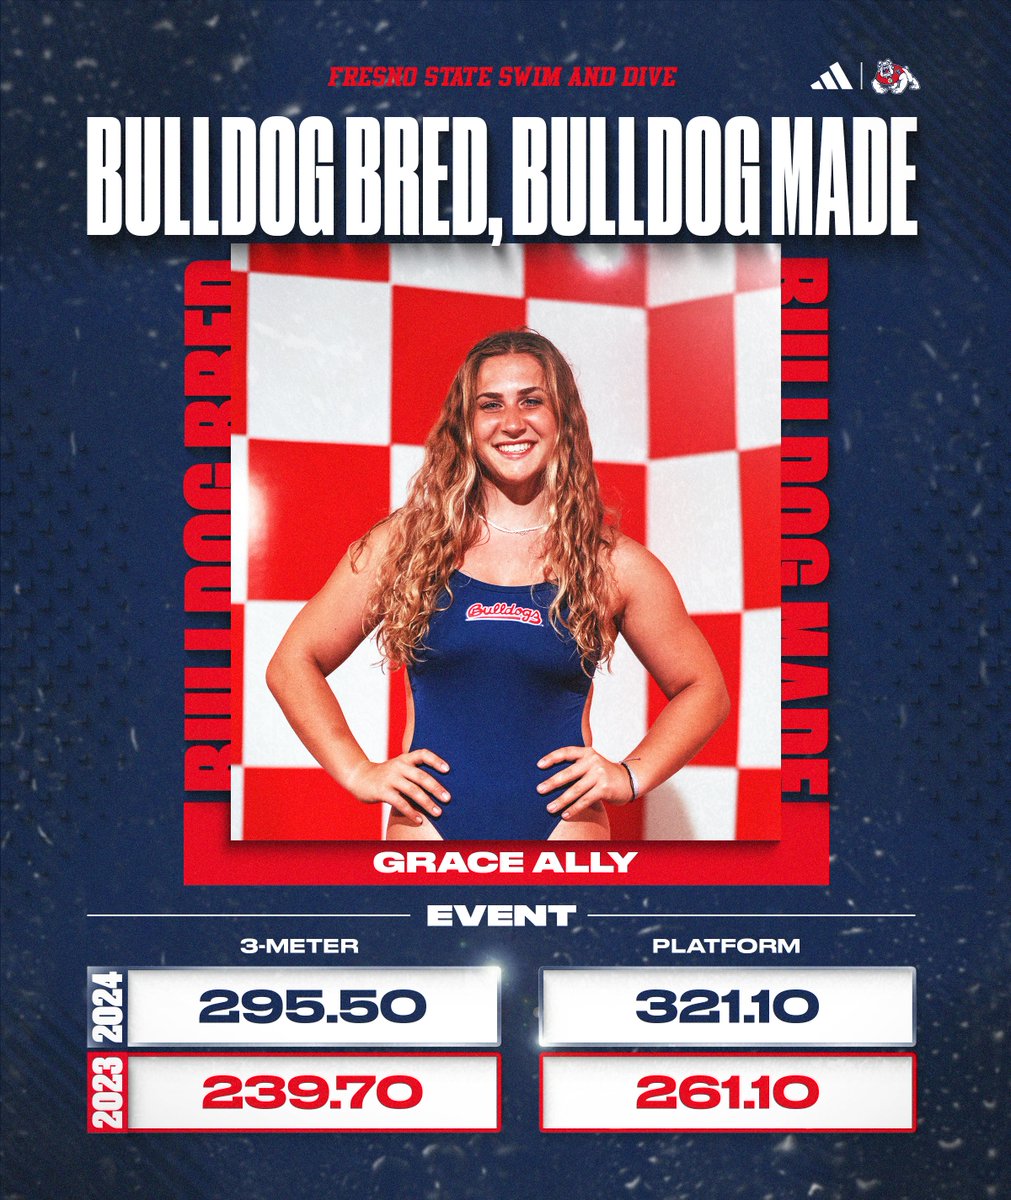 𝘋𝘪𝘷𝘪𝘯𝘨 all the way to the top! ✨ Grace Ally made her mark this season after a record breaking display at MWC in the platform ‼️